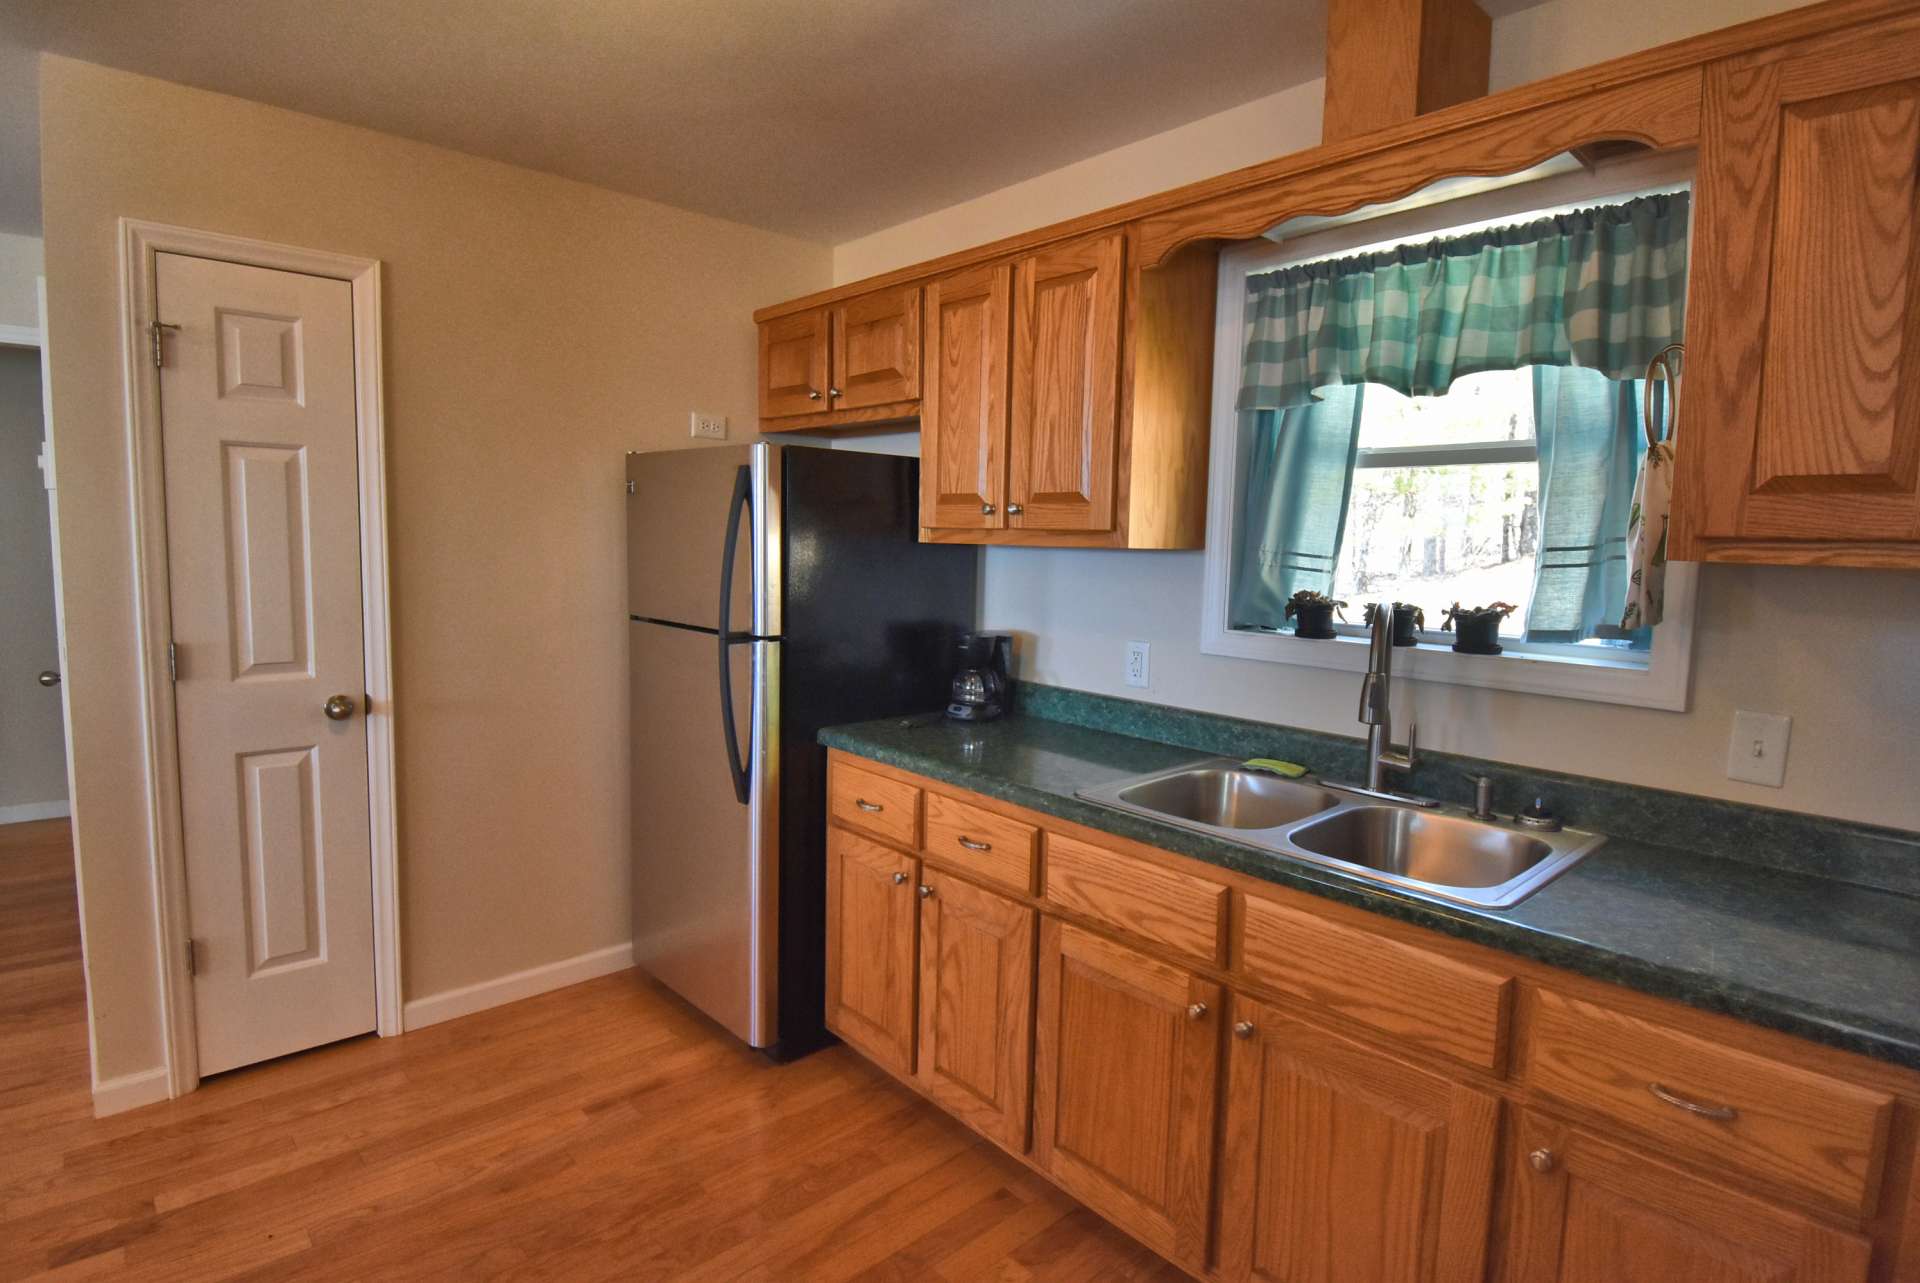 The step saving and efficient kitchen offers ample work and storage space.